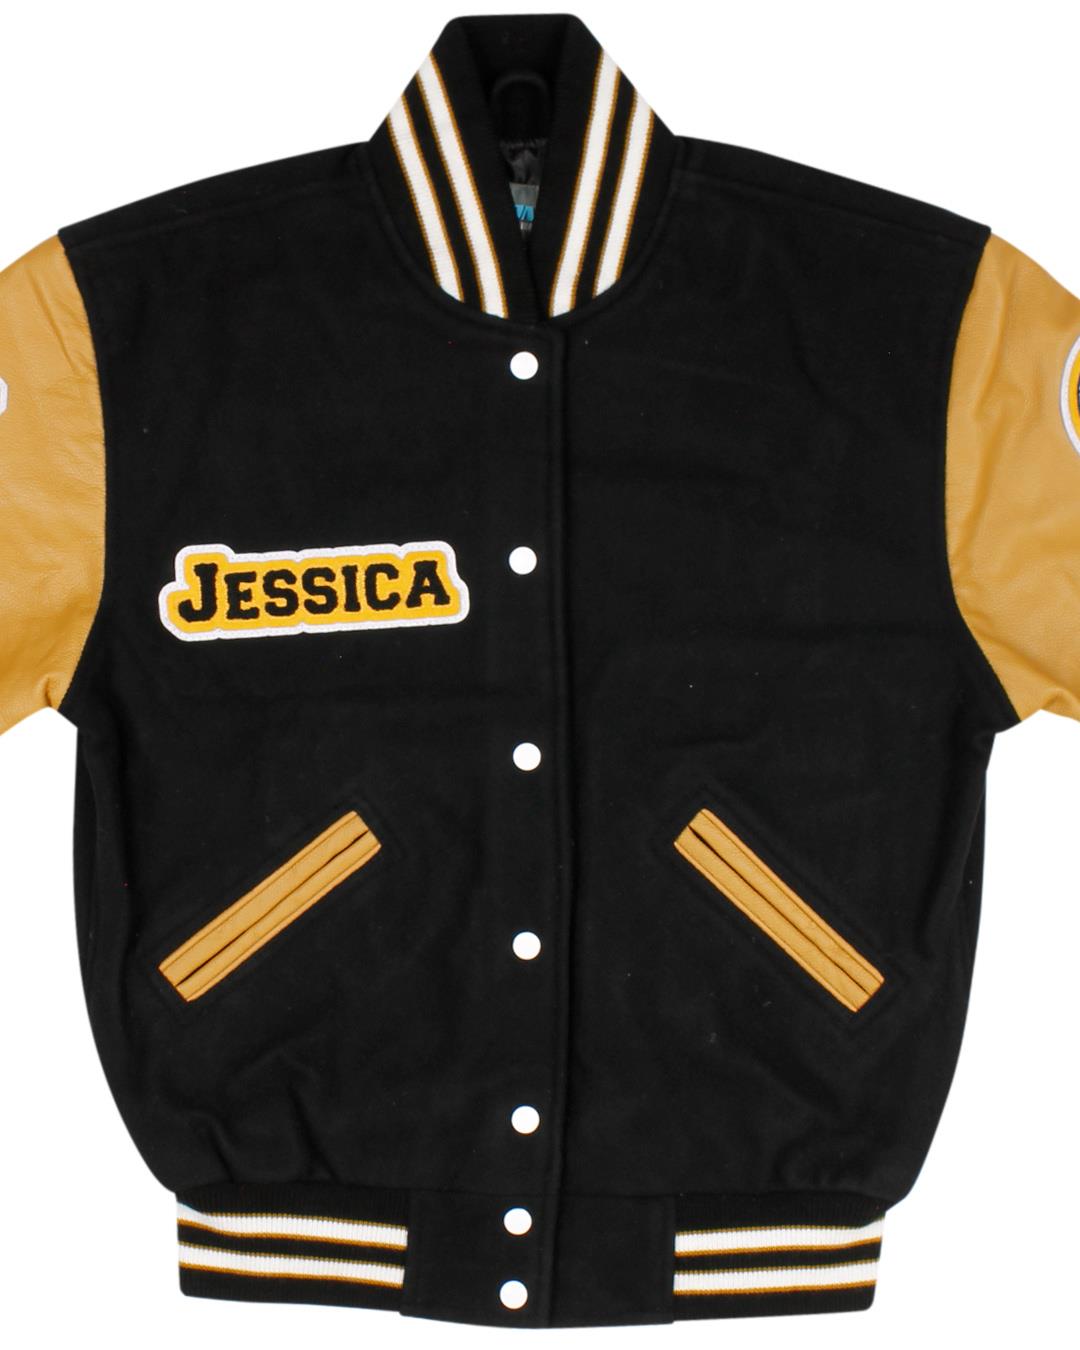 American Canyon High School Letterman Jacket, American Canyon CA - Front